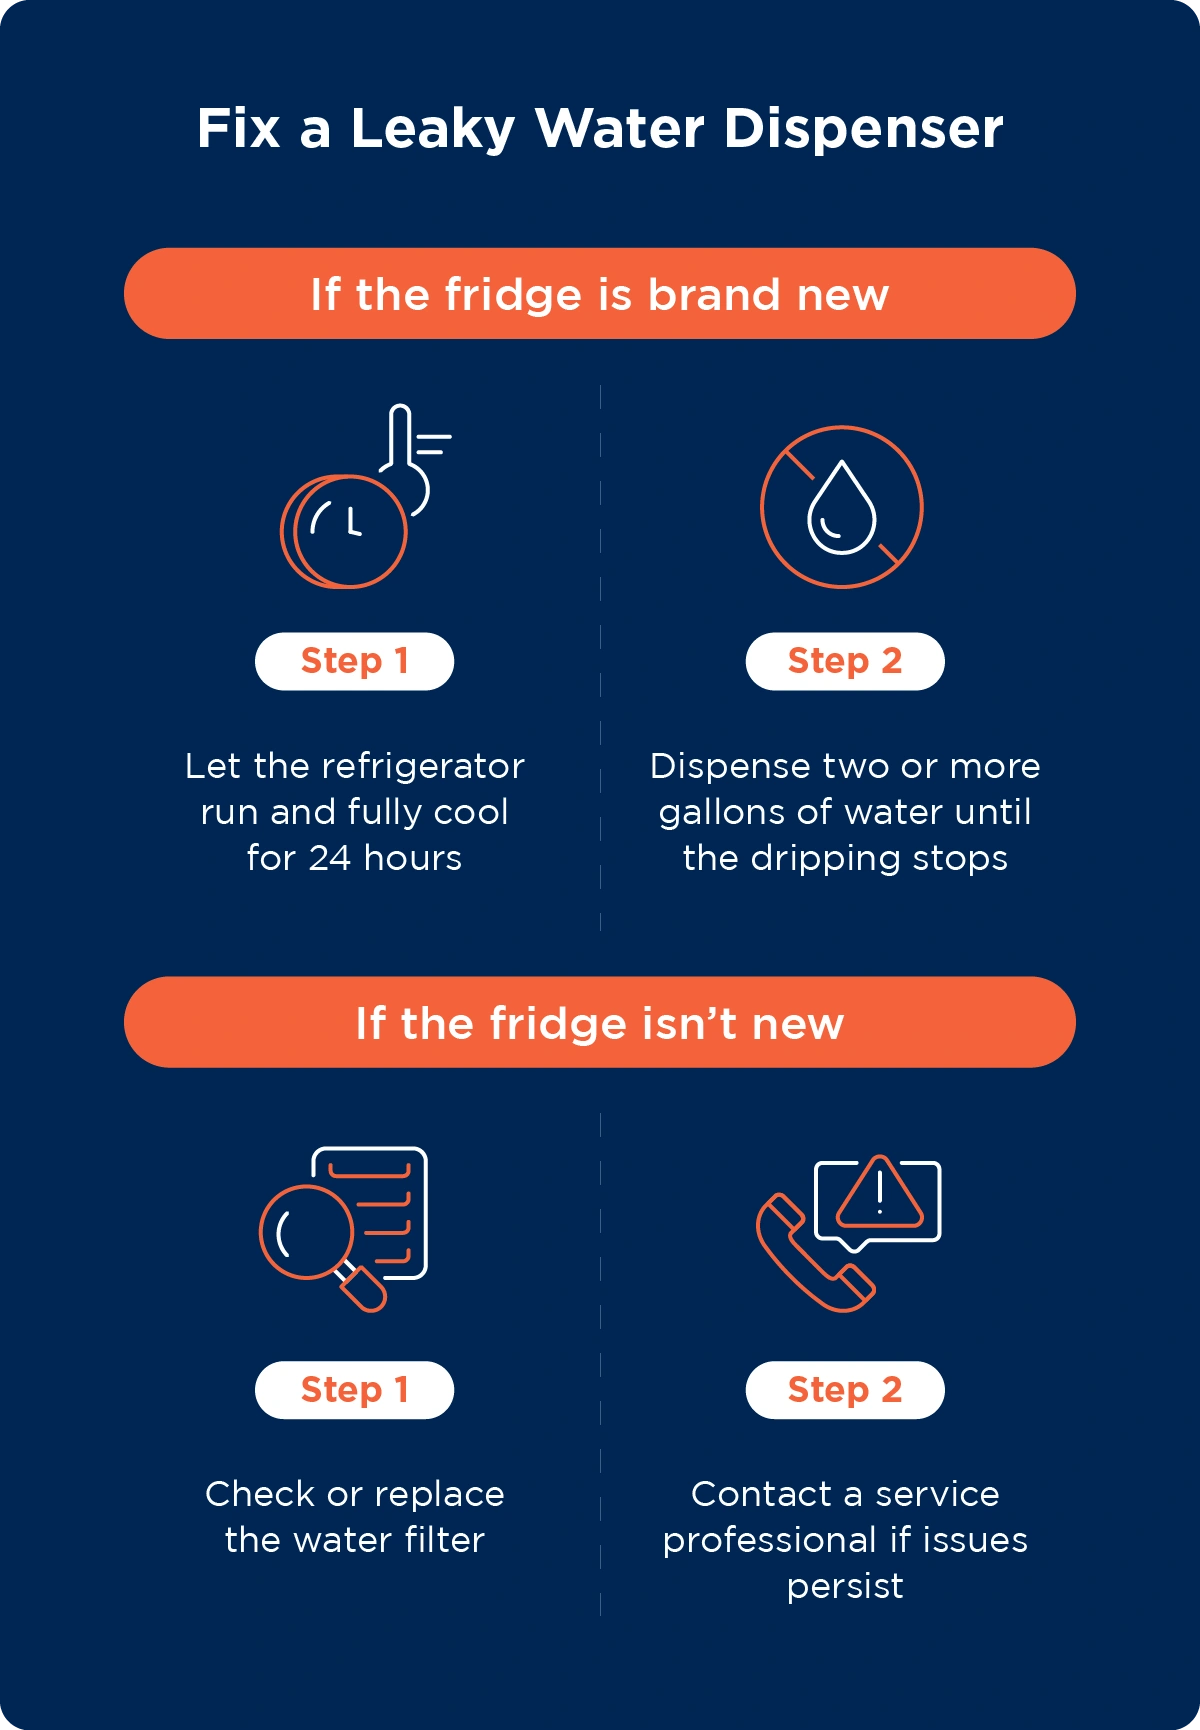 Image covers how to fix a leaky water dispenser for a fridge whether or not it’s brand new.